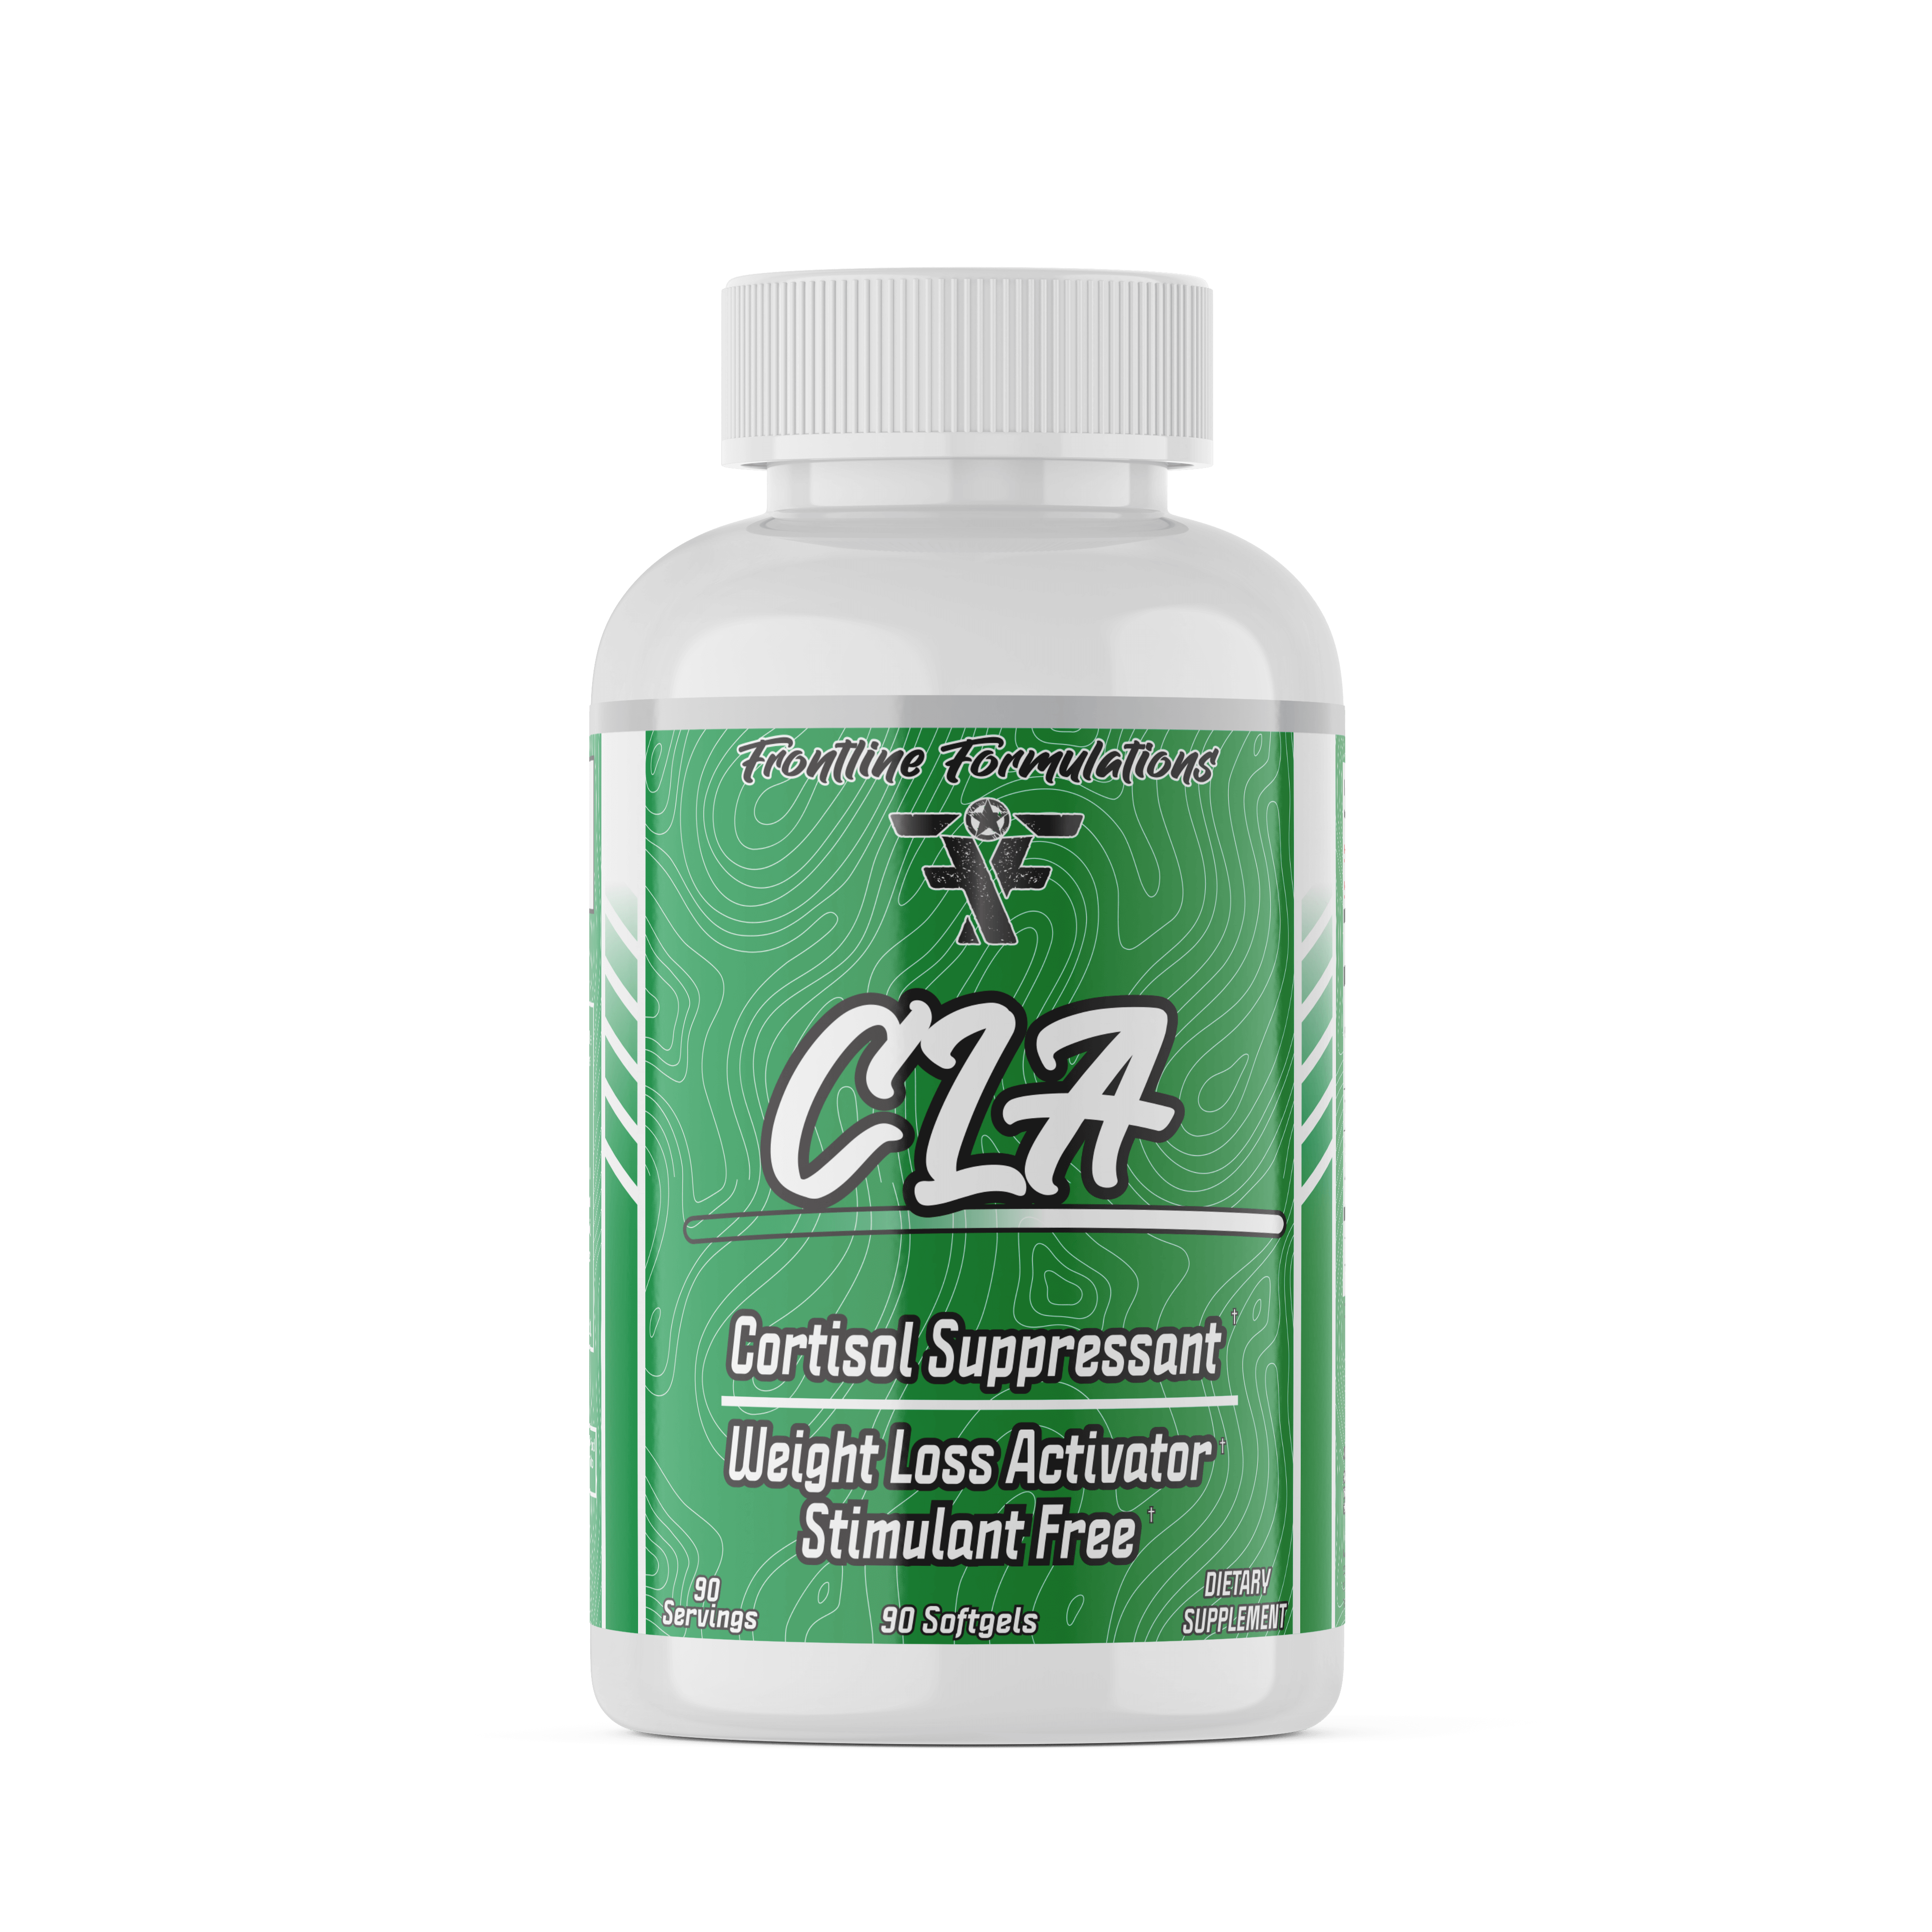 CLA CLA, or Conjugated Linoleic Acid, is a type of fatty acid found in certain foods like dairy products and beef, particularly from grass-fed animals. It's widely studied for its potential health benefits, especially in relation to weight management and